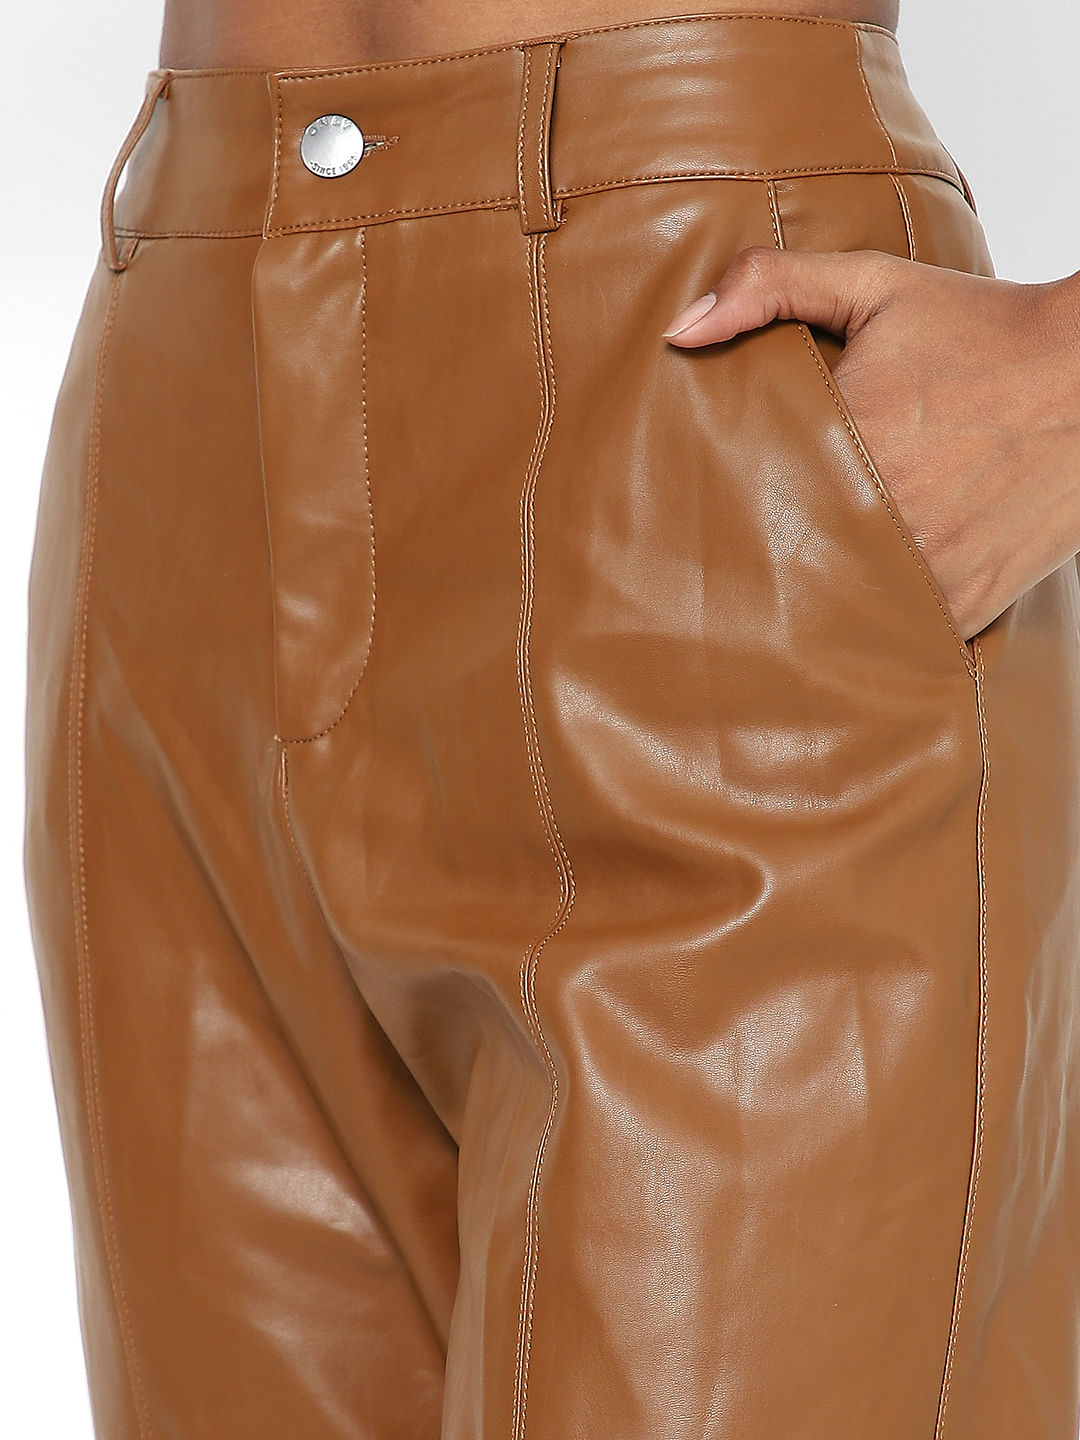 Leather trousers in double brown  Designbysise